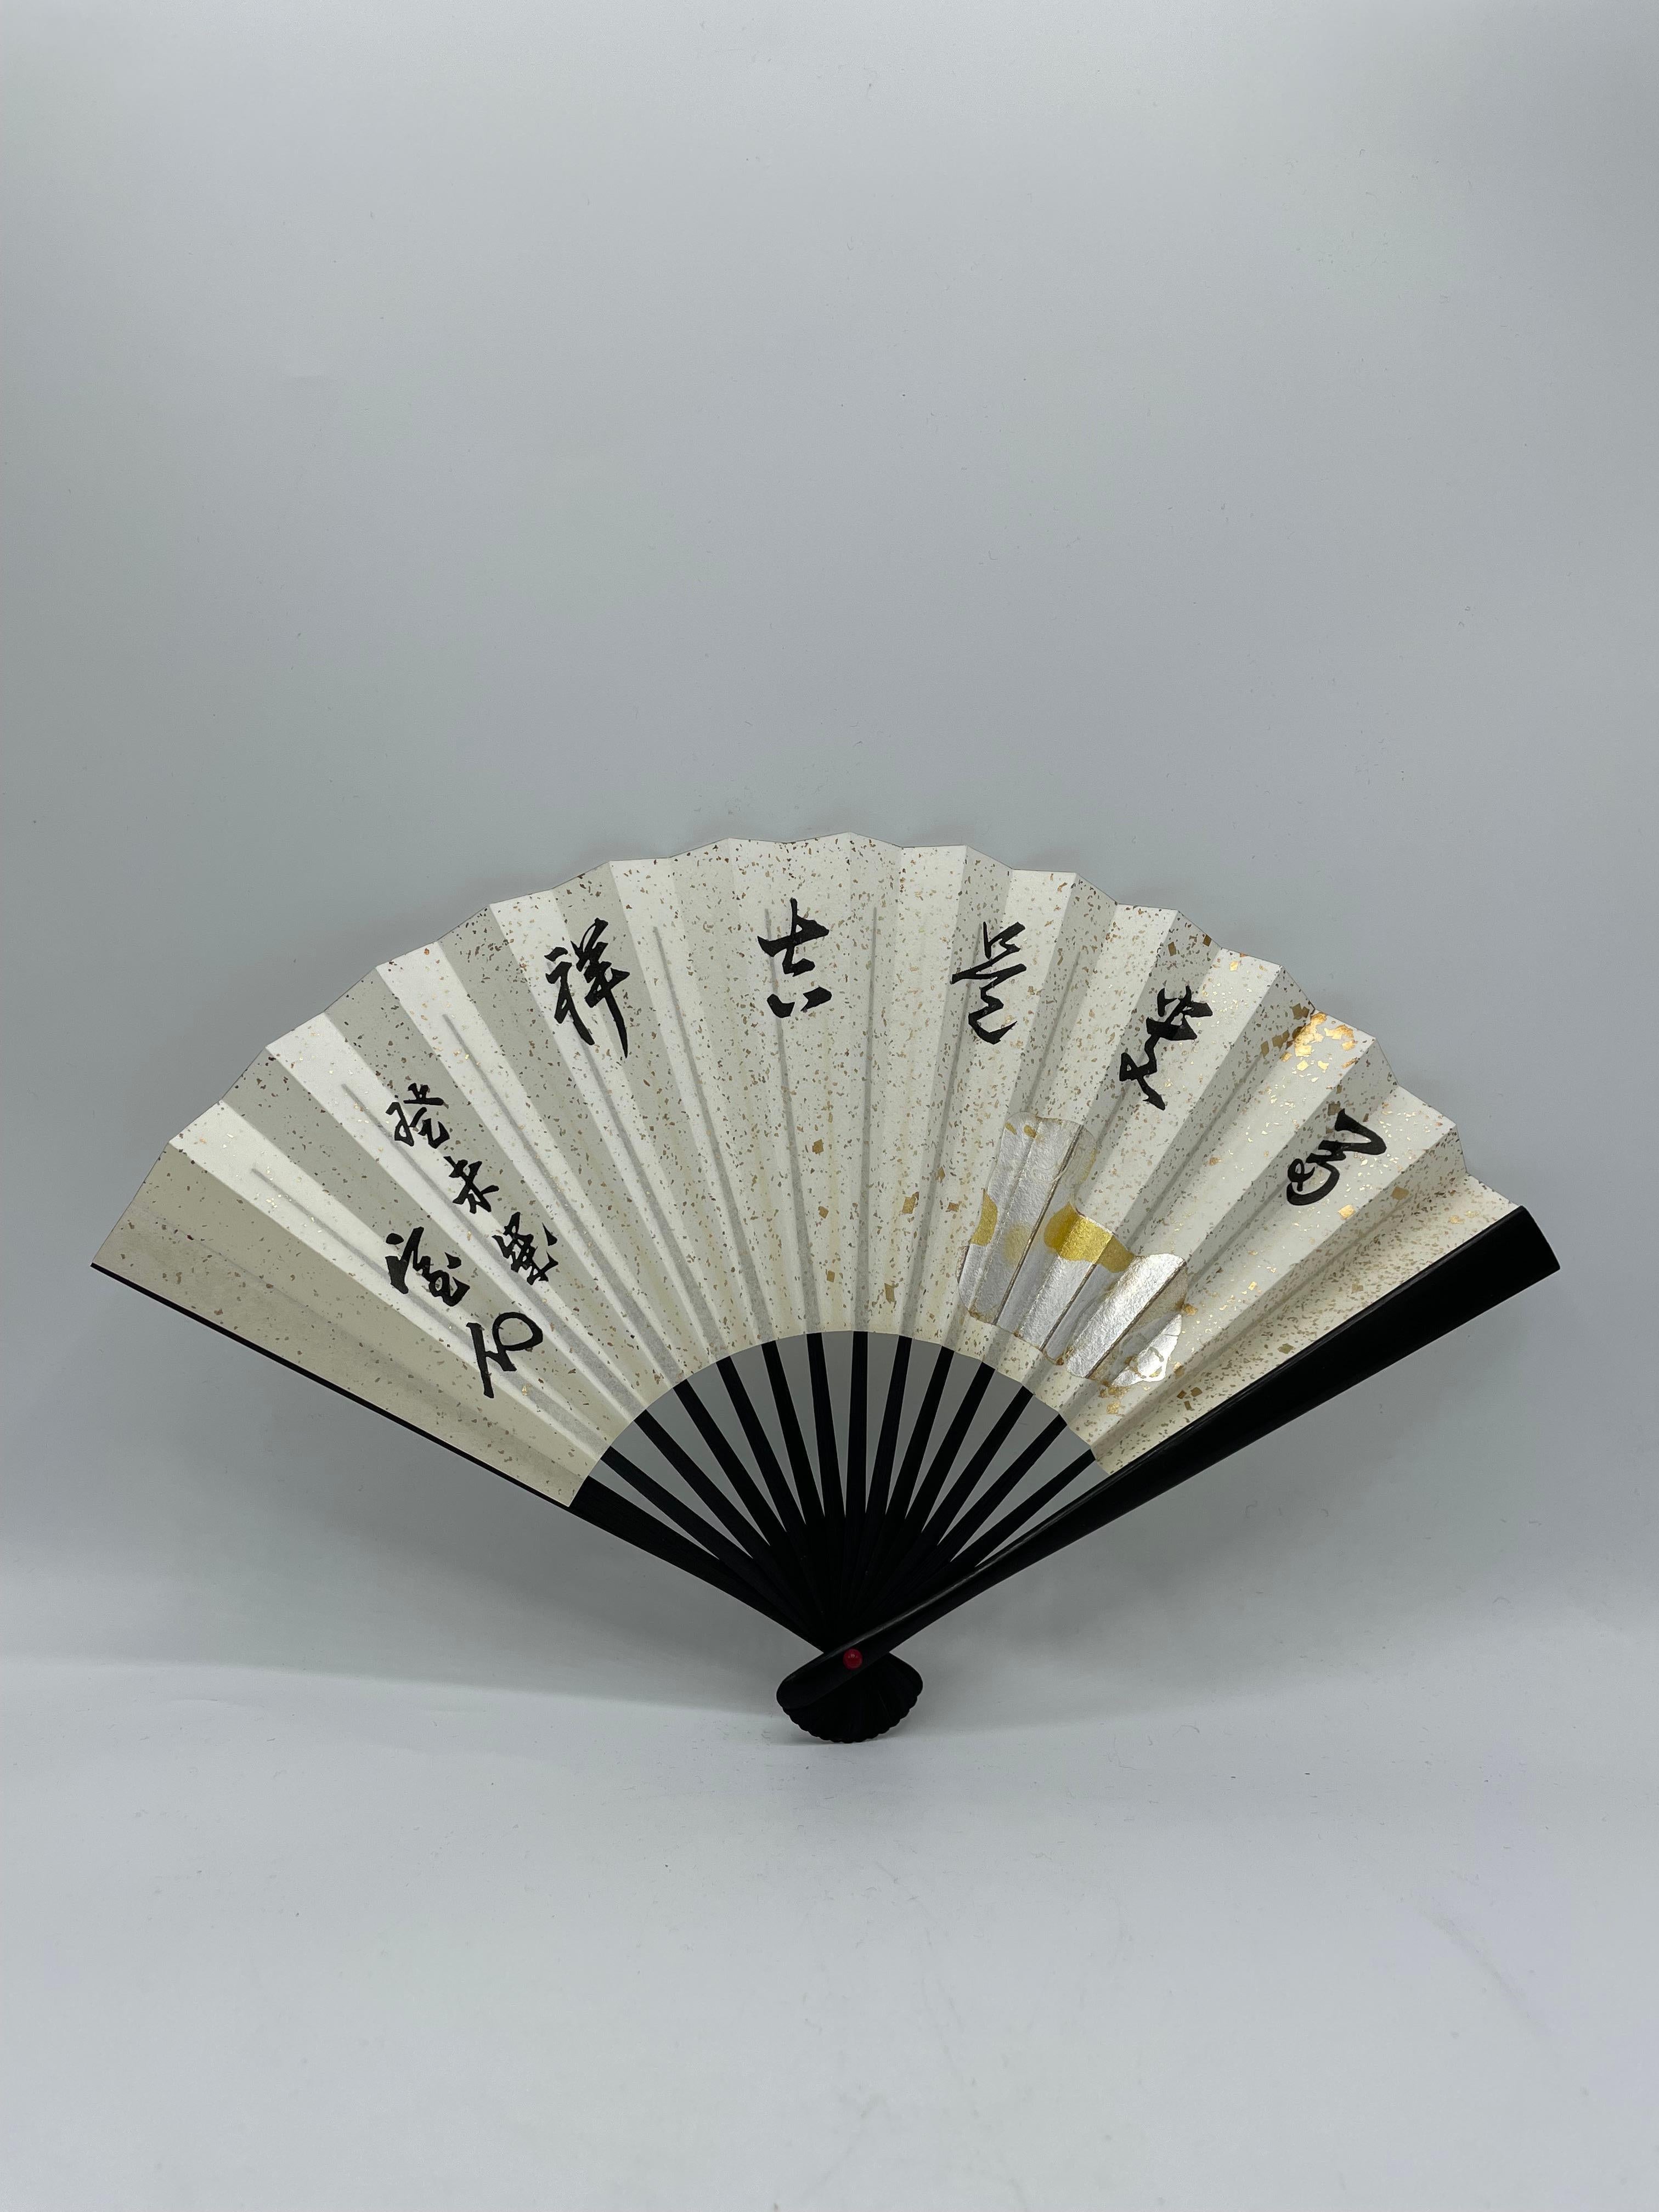 This is a fan which was made in Japan around 1990s in Heisei era.
This is made with a paper and bamboos.

Japanese fans are made of paper on a bamboo frame, usually with a design painted on them. In addition to folding fans (ōgi), the non-bending